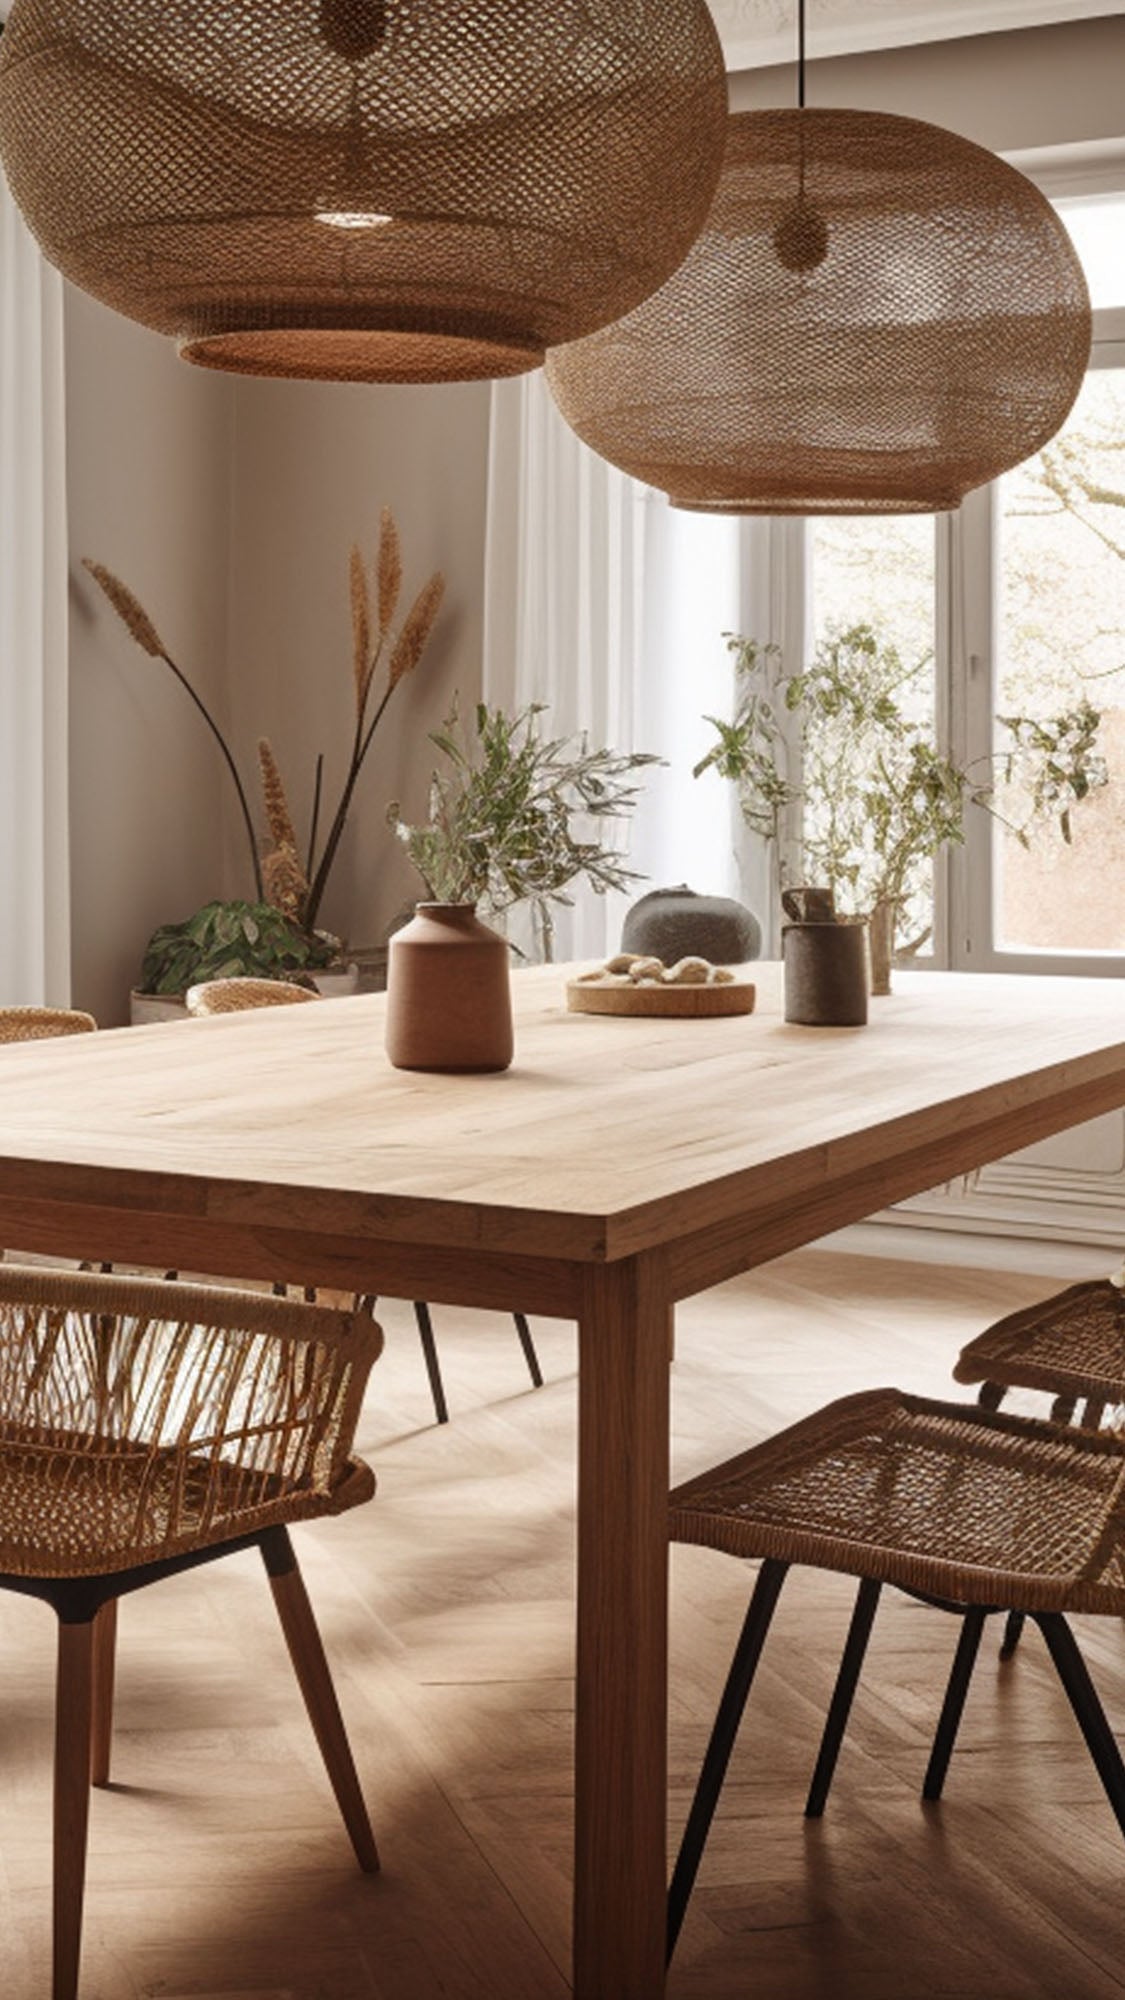 Dining room with light wooden furniture in a Scandinavian style